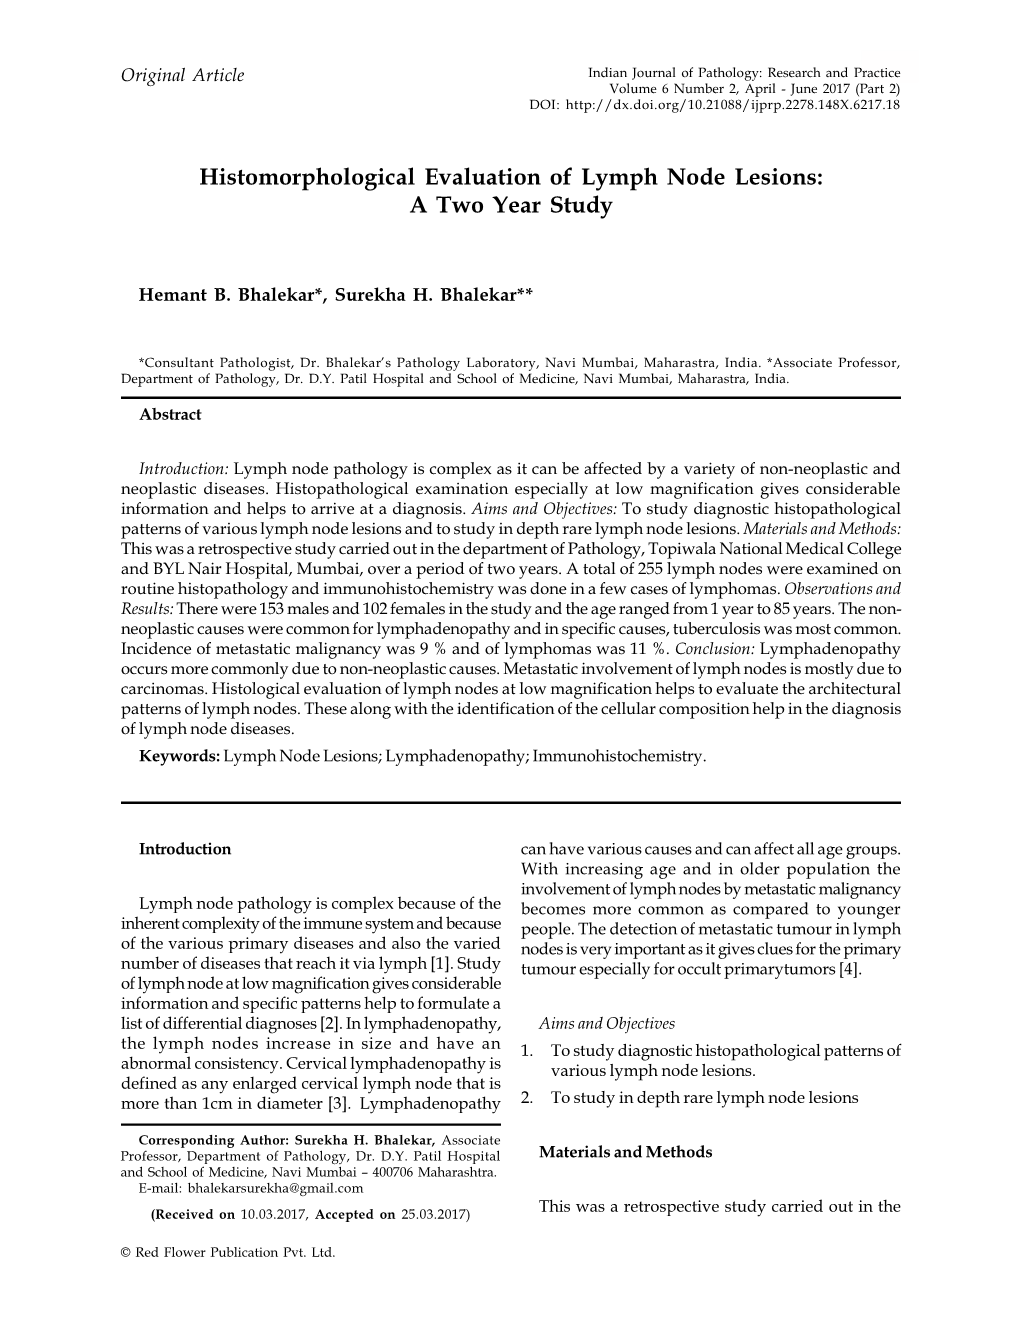 Histomorphological Evaluation of Lymph Node Lesions: a Two Year Study